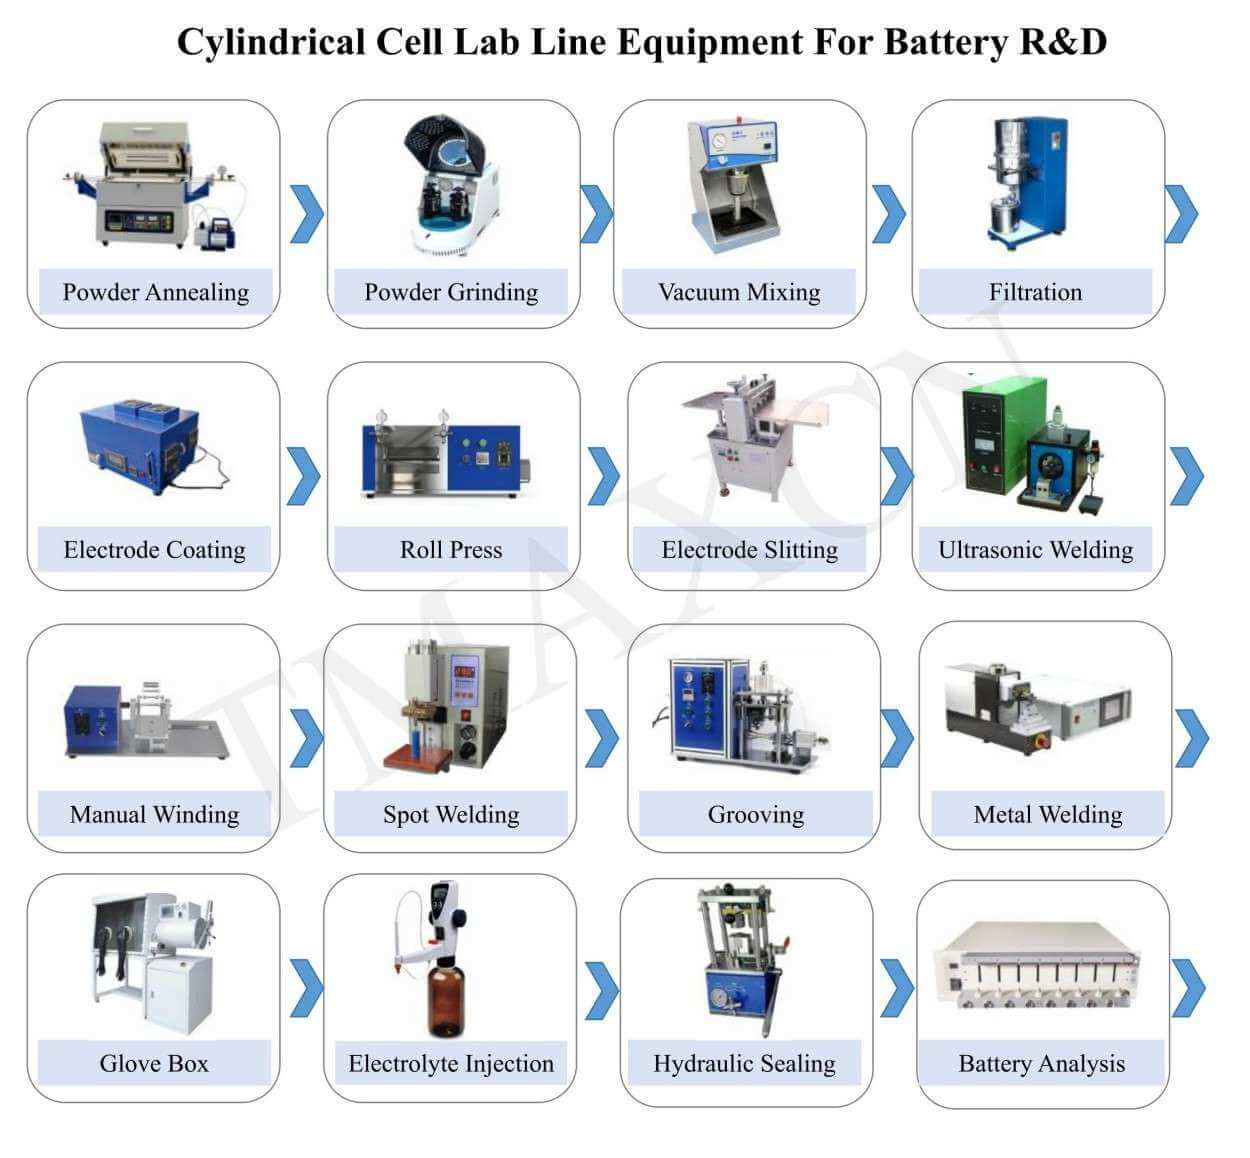 CYLINDRICAL CELL MANUFACTURING PROCESS